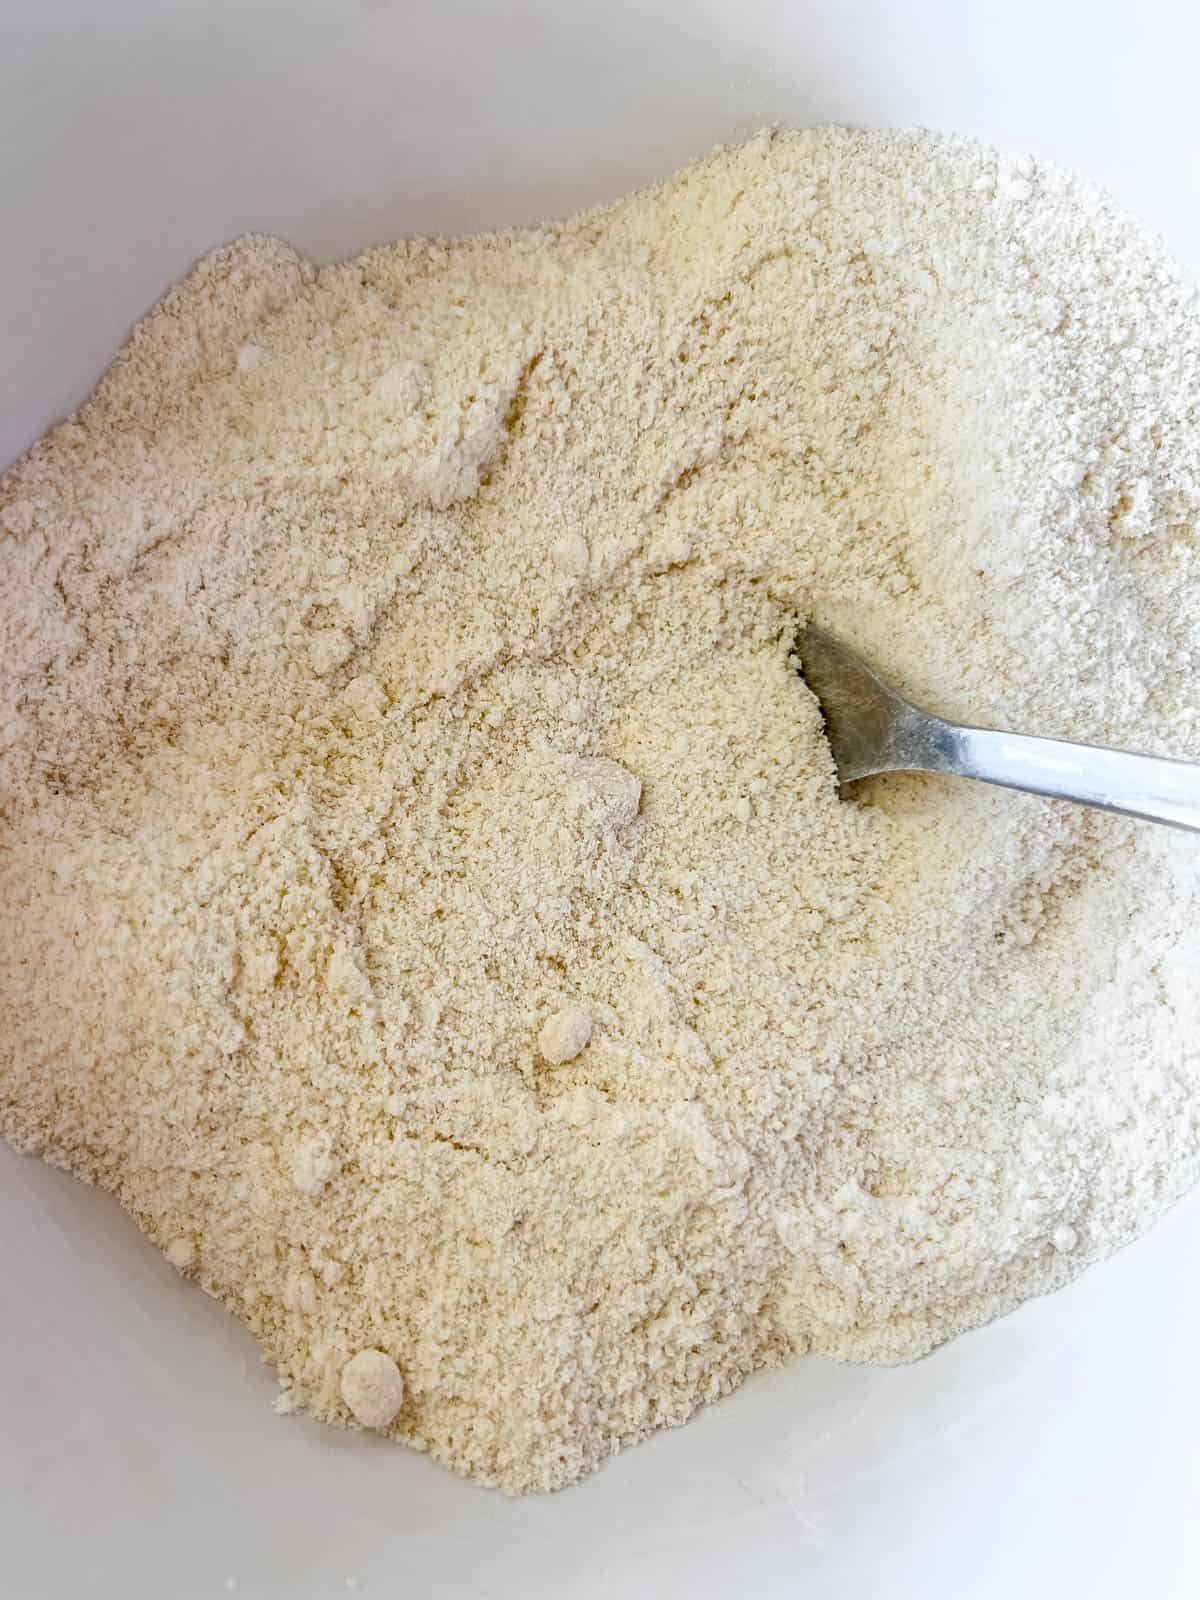 The dry ingredients mixed together in a bowl.